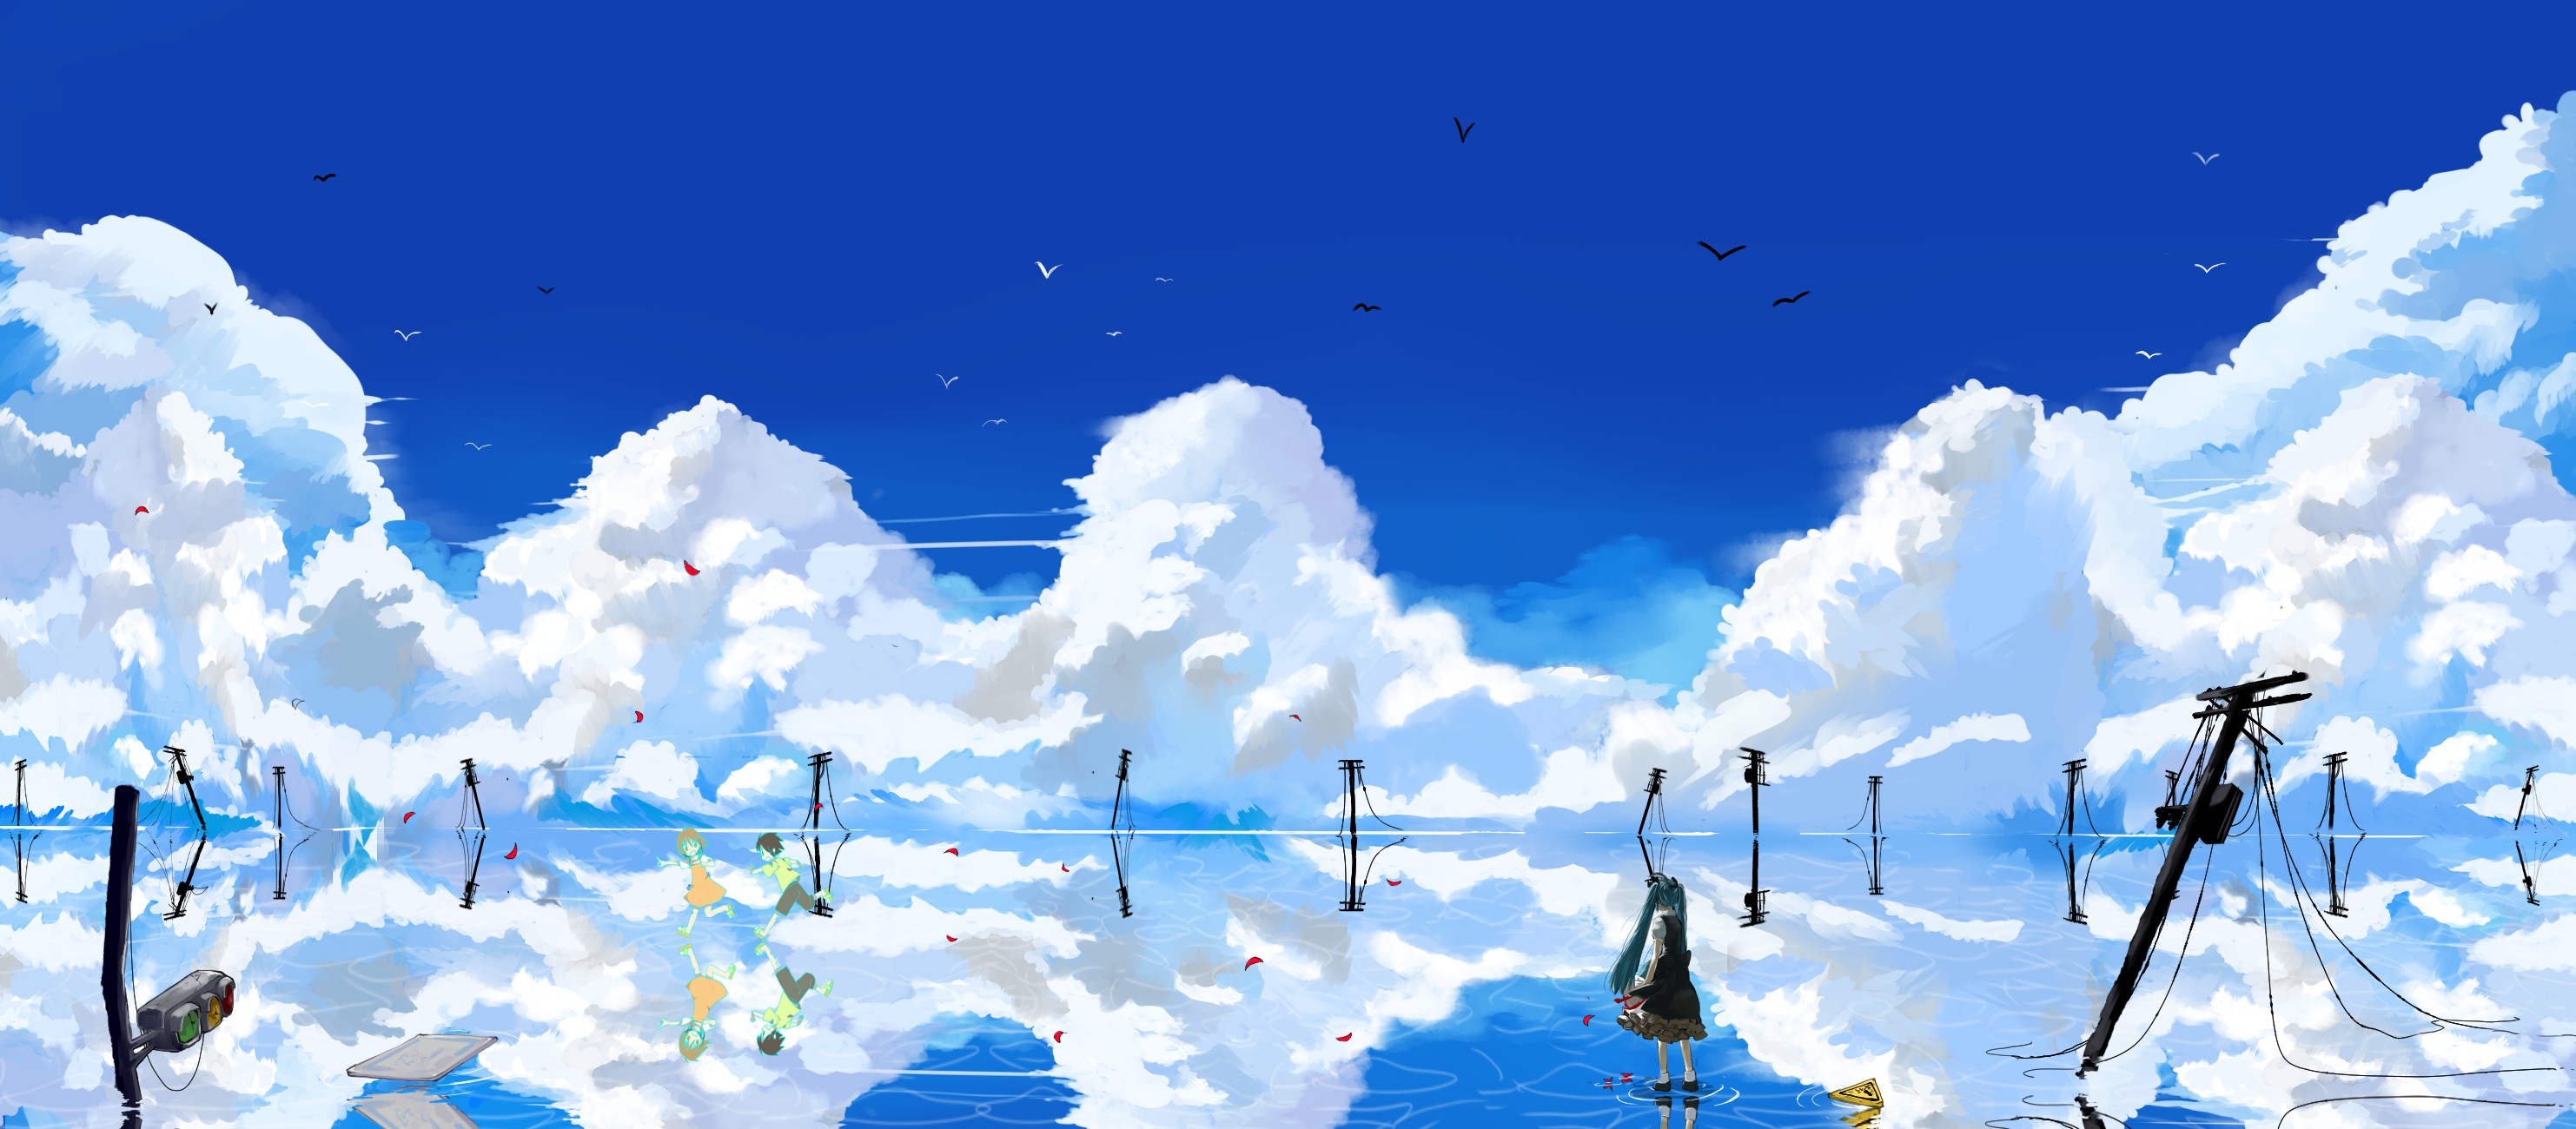 water, Abstract, Blue, Clouds, Landscapes, Vocaloid, Hatsune, Miku, Fantasy, Art, Twintails, Anime, Run, Reflections, Anime, Girls, Blue, Skies Wallpaper